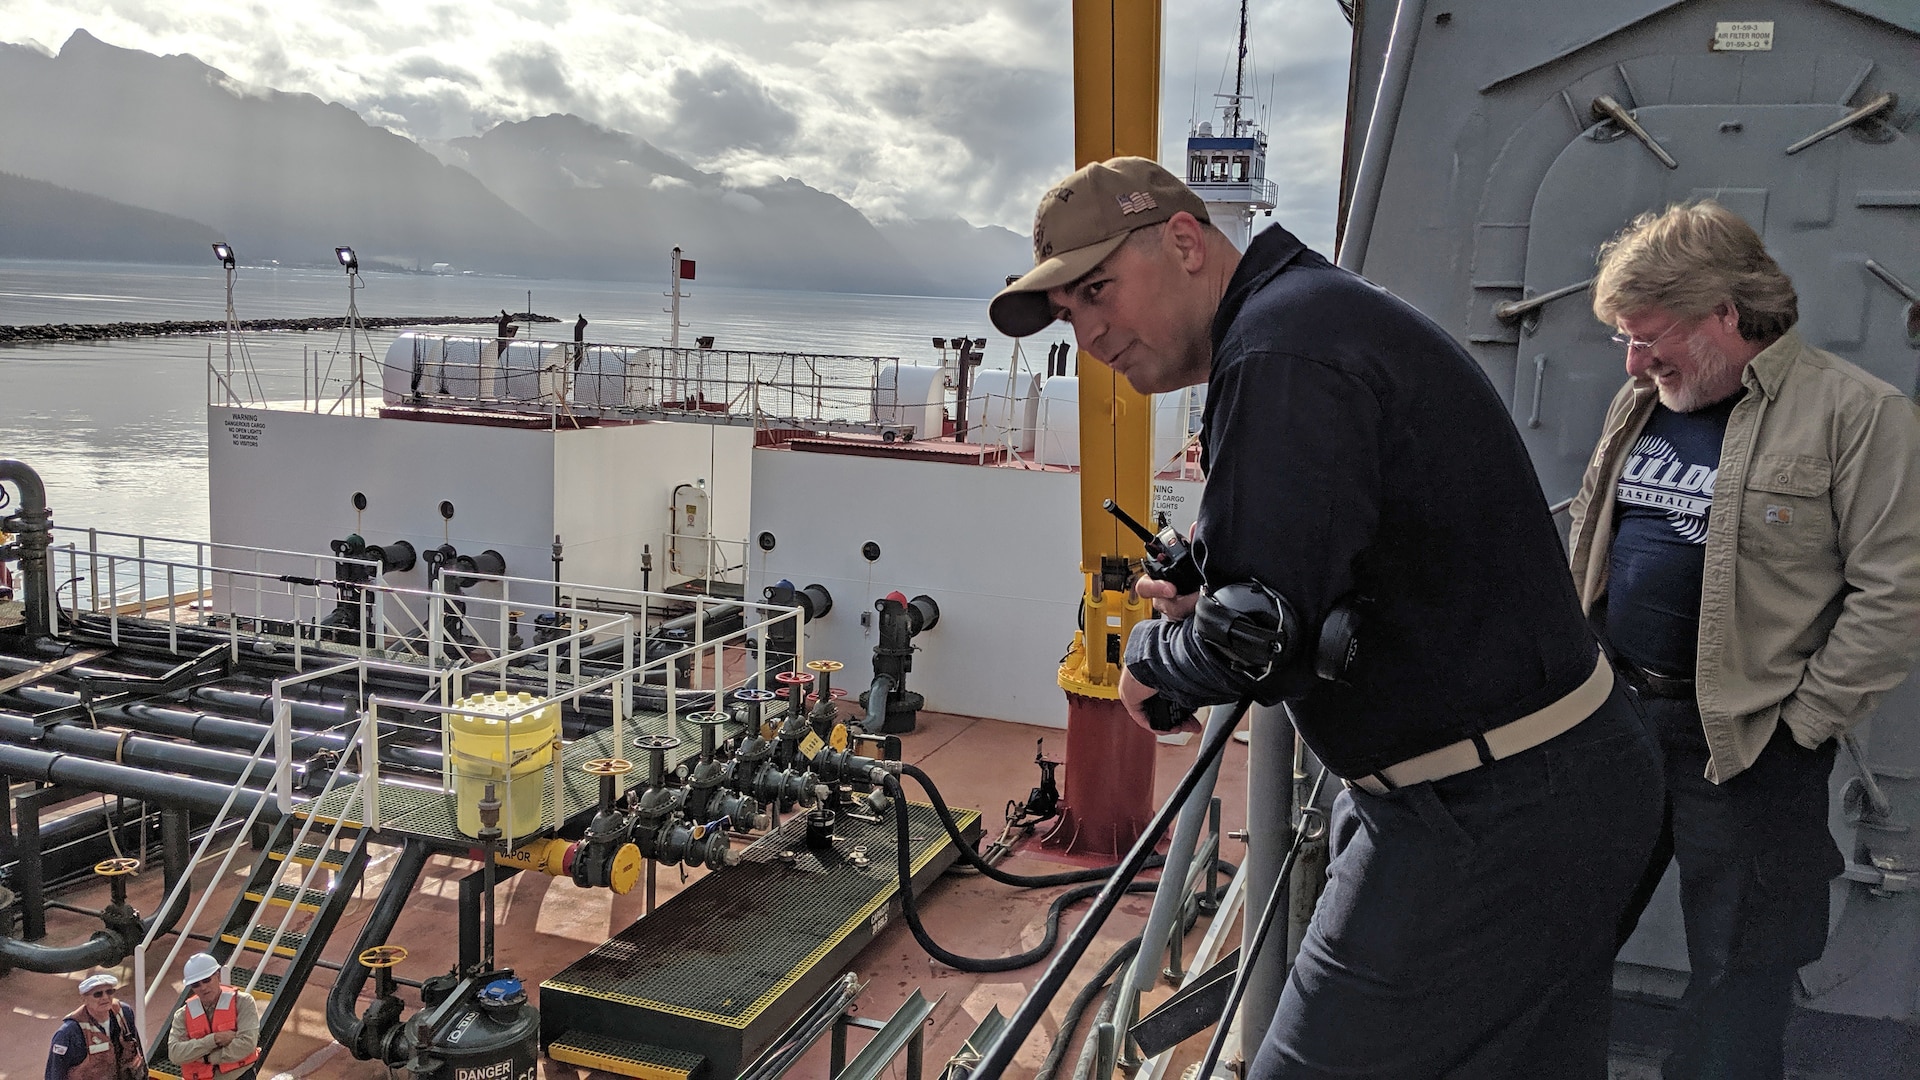 men observe refueling operations on a ship